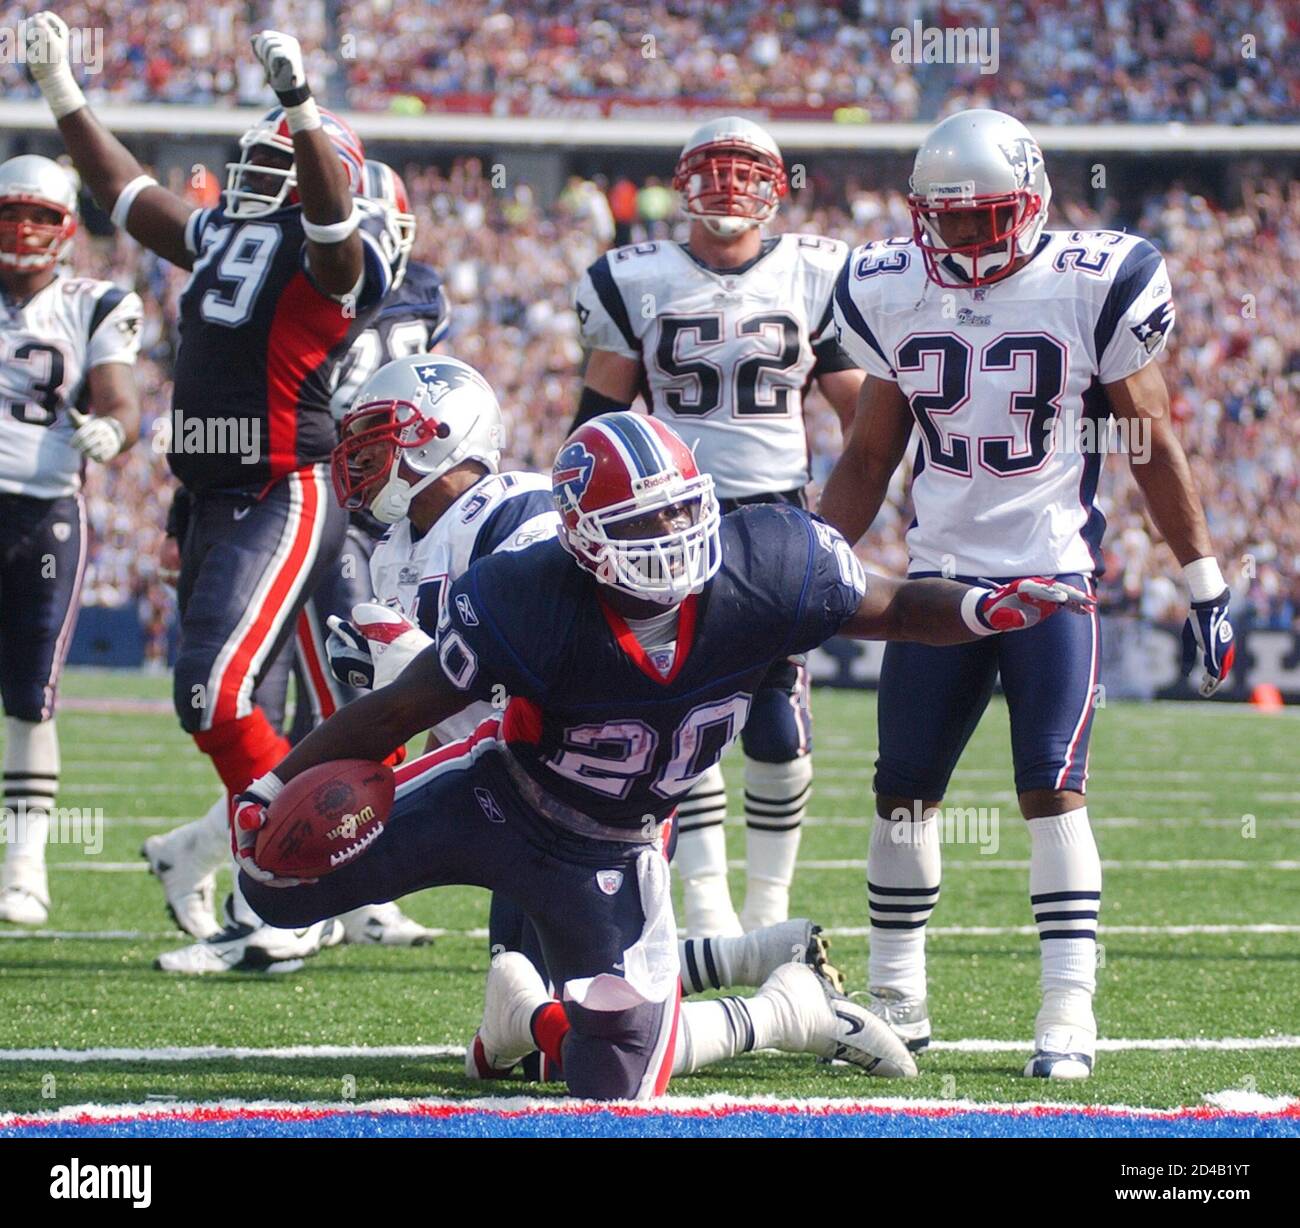 Buffalo Bills running back Travis Henry (20) crosses the end zone his touchdown as New England safety Rodney (37) fails to make the tackle on September 7, 2003 at